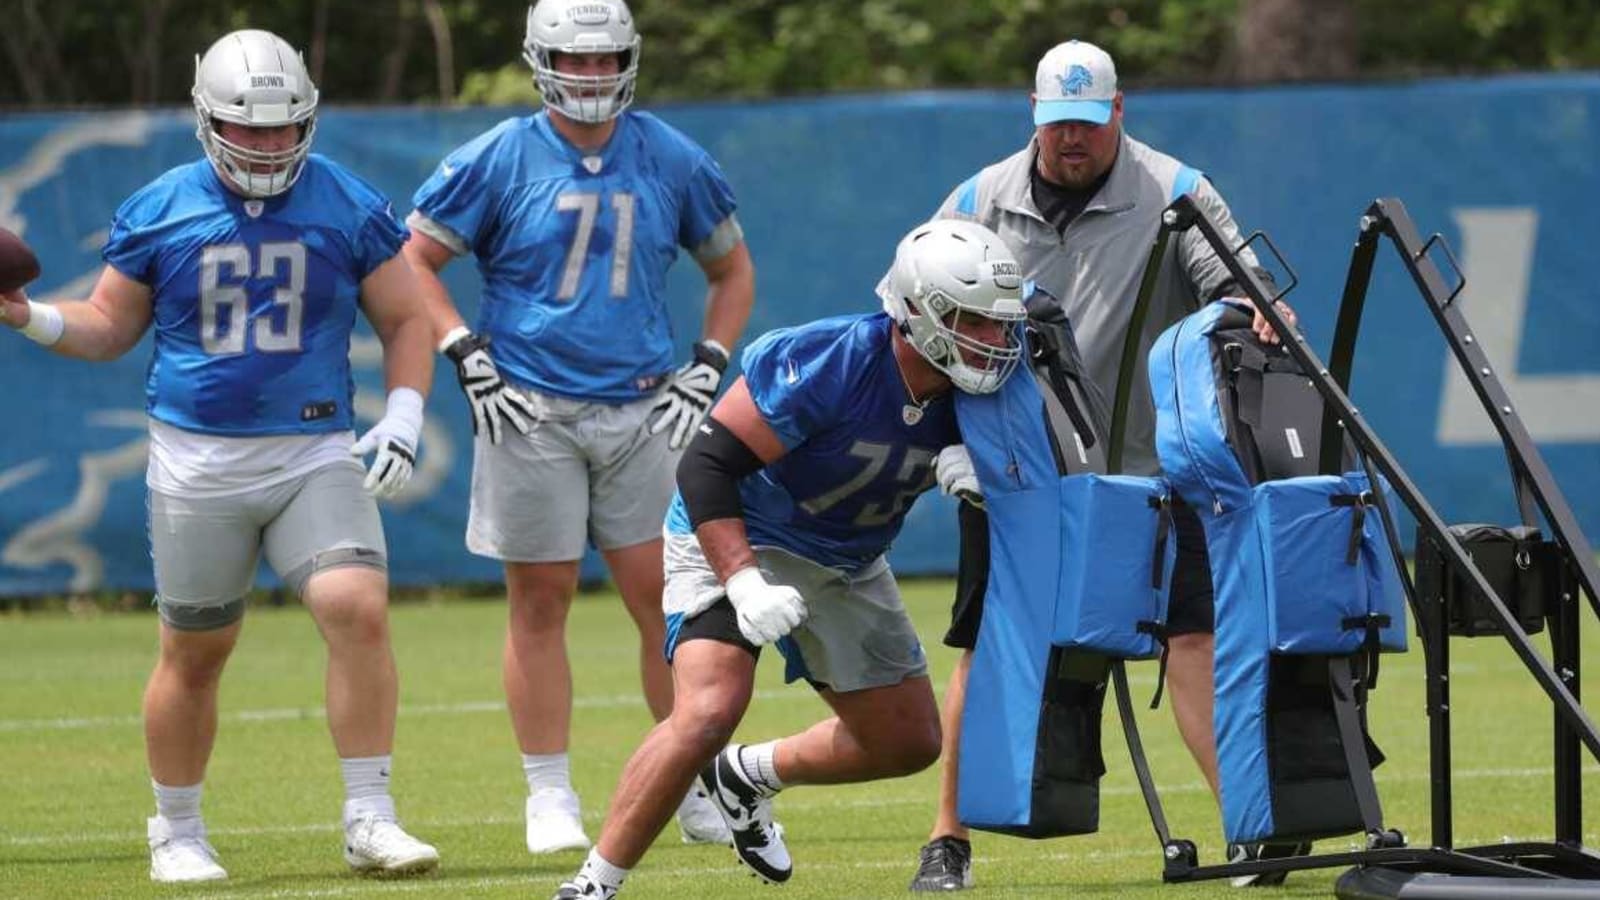 It seems the Lions may not value offensive line as much as some think they should